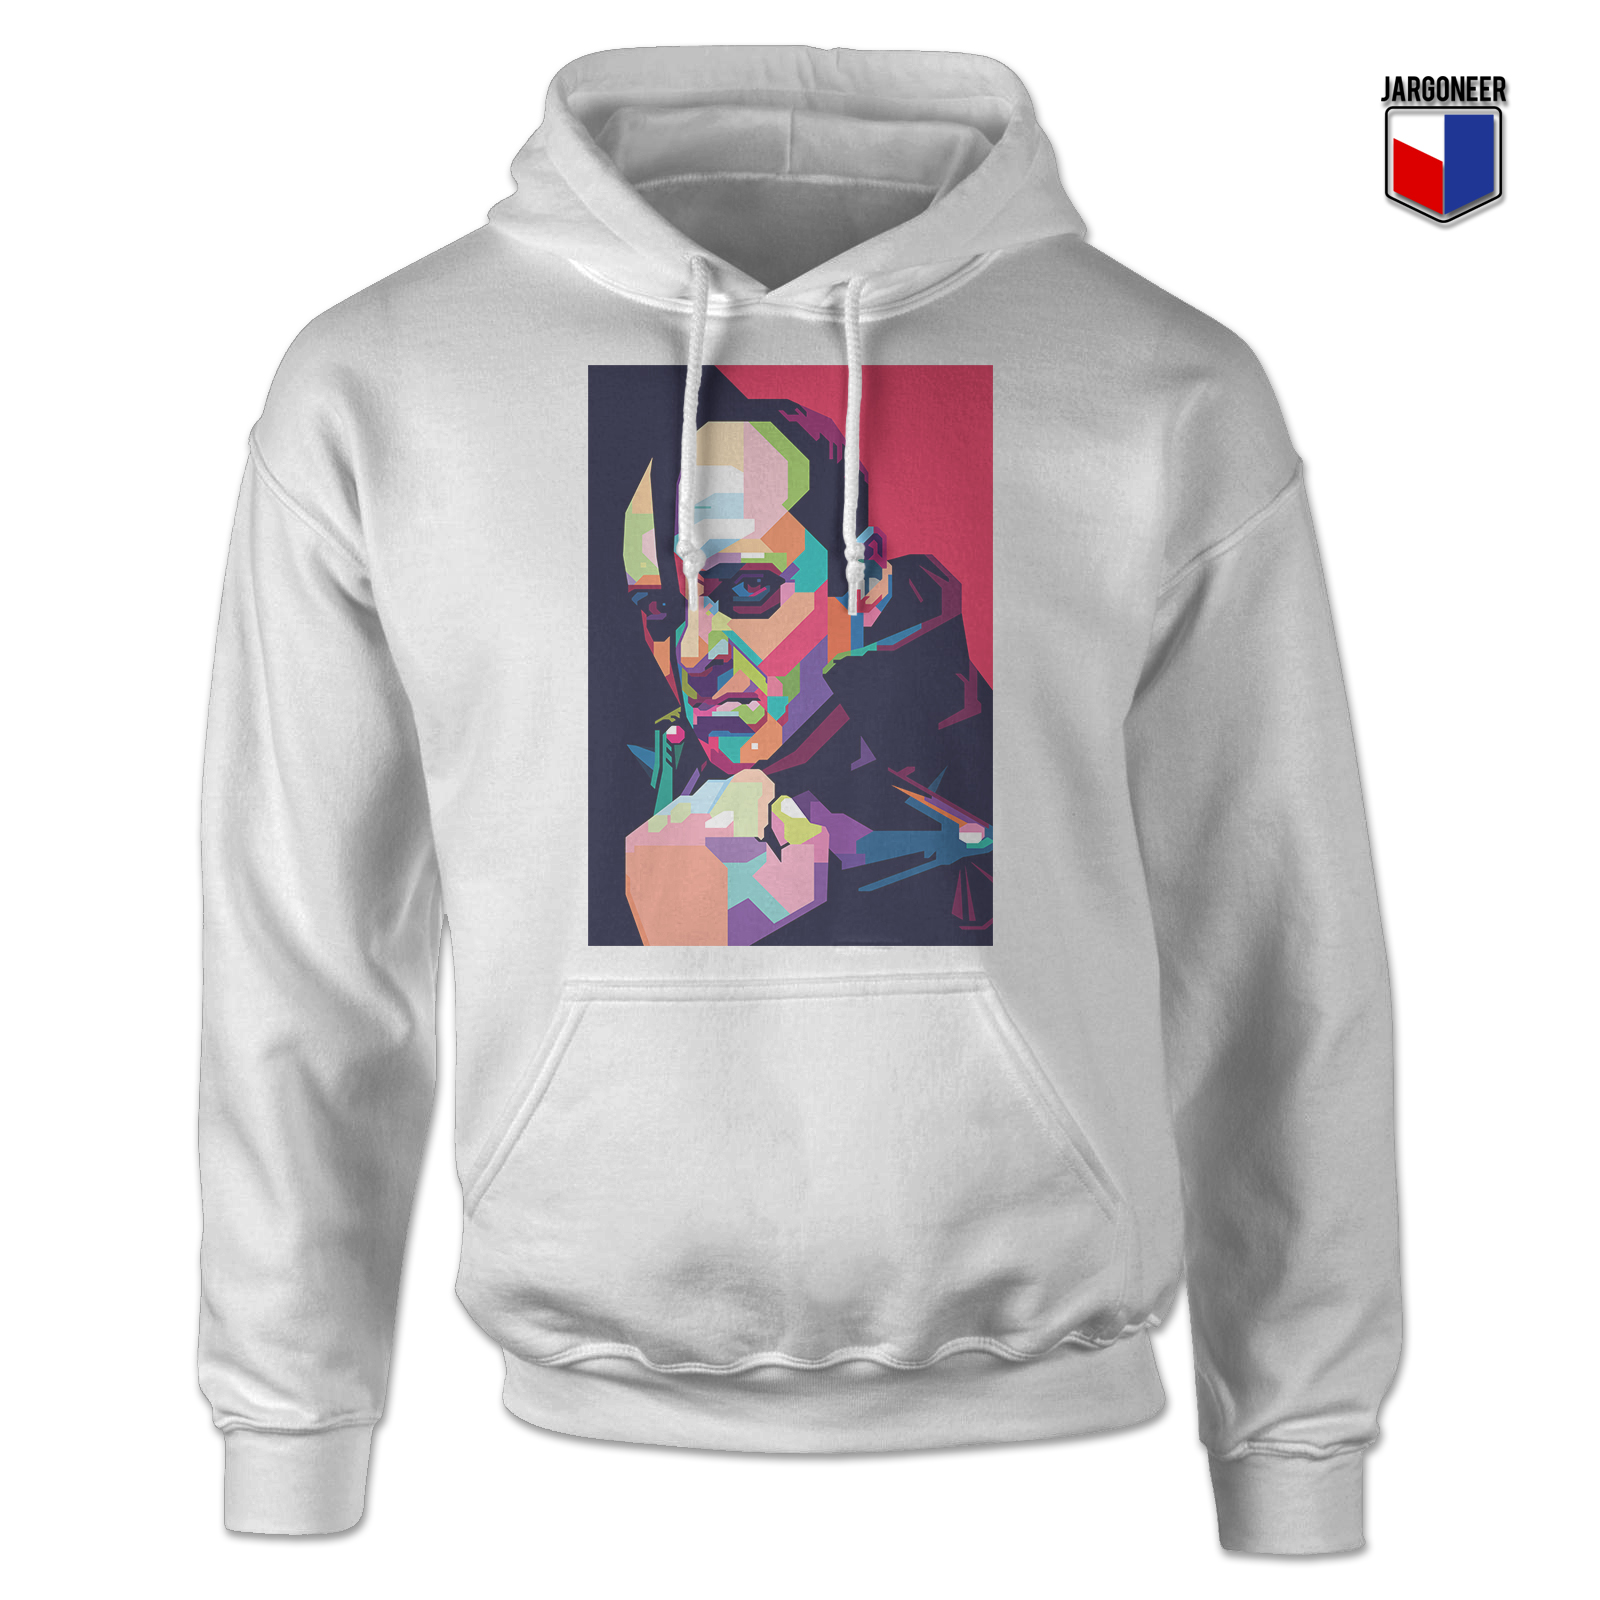 Jerry Only White Hoody - Shop Unique Graphic Cool Shirt Designs